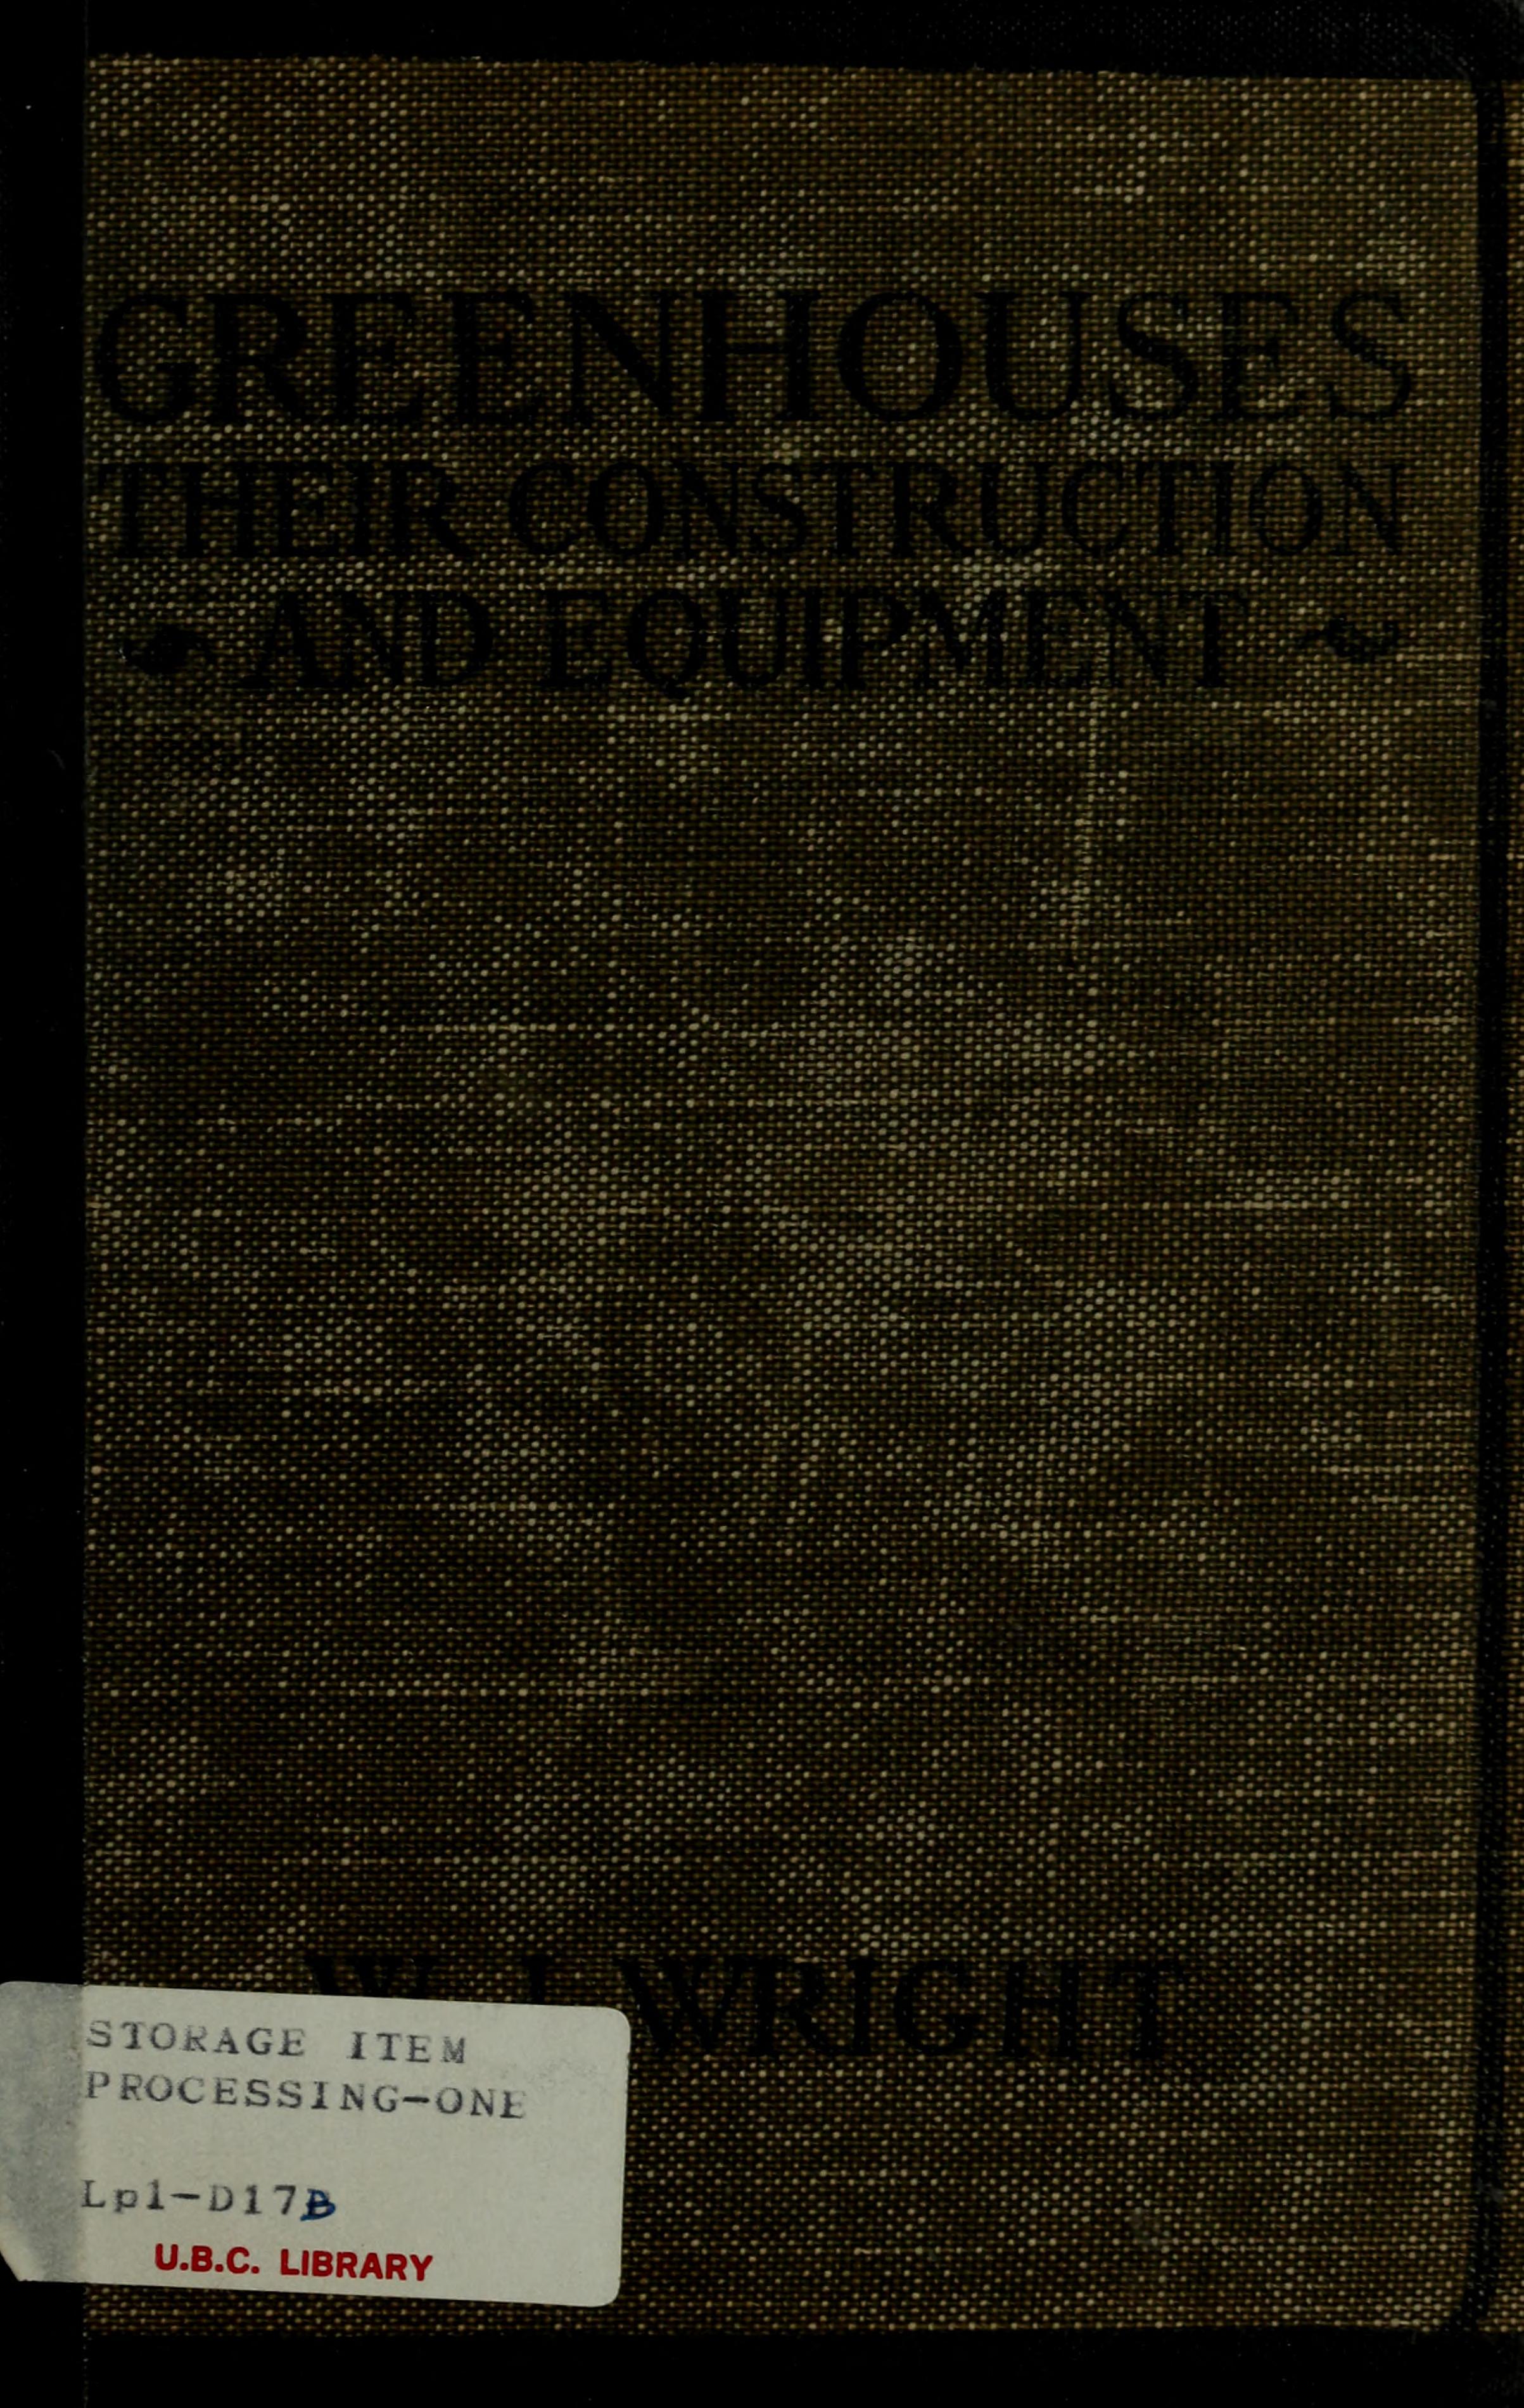 Greenhouses; their construction and equipment, by W. J. Wright ...